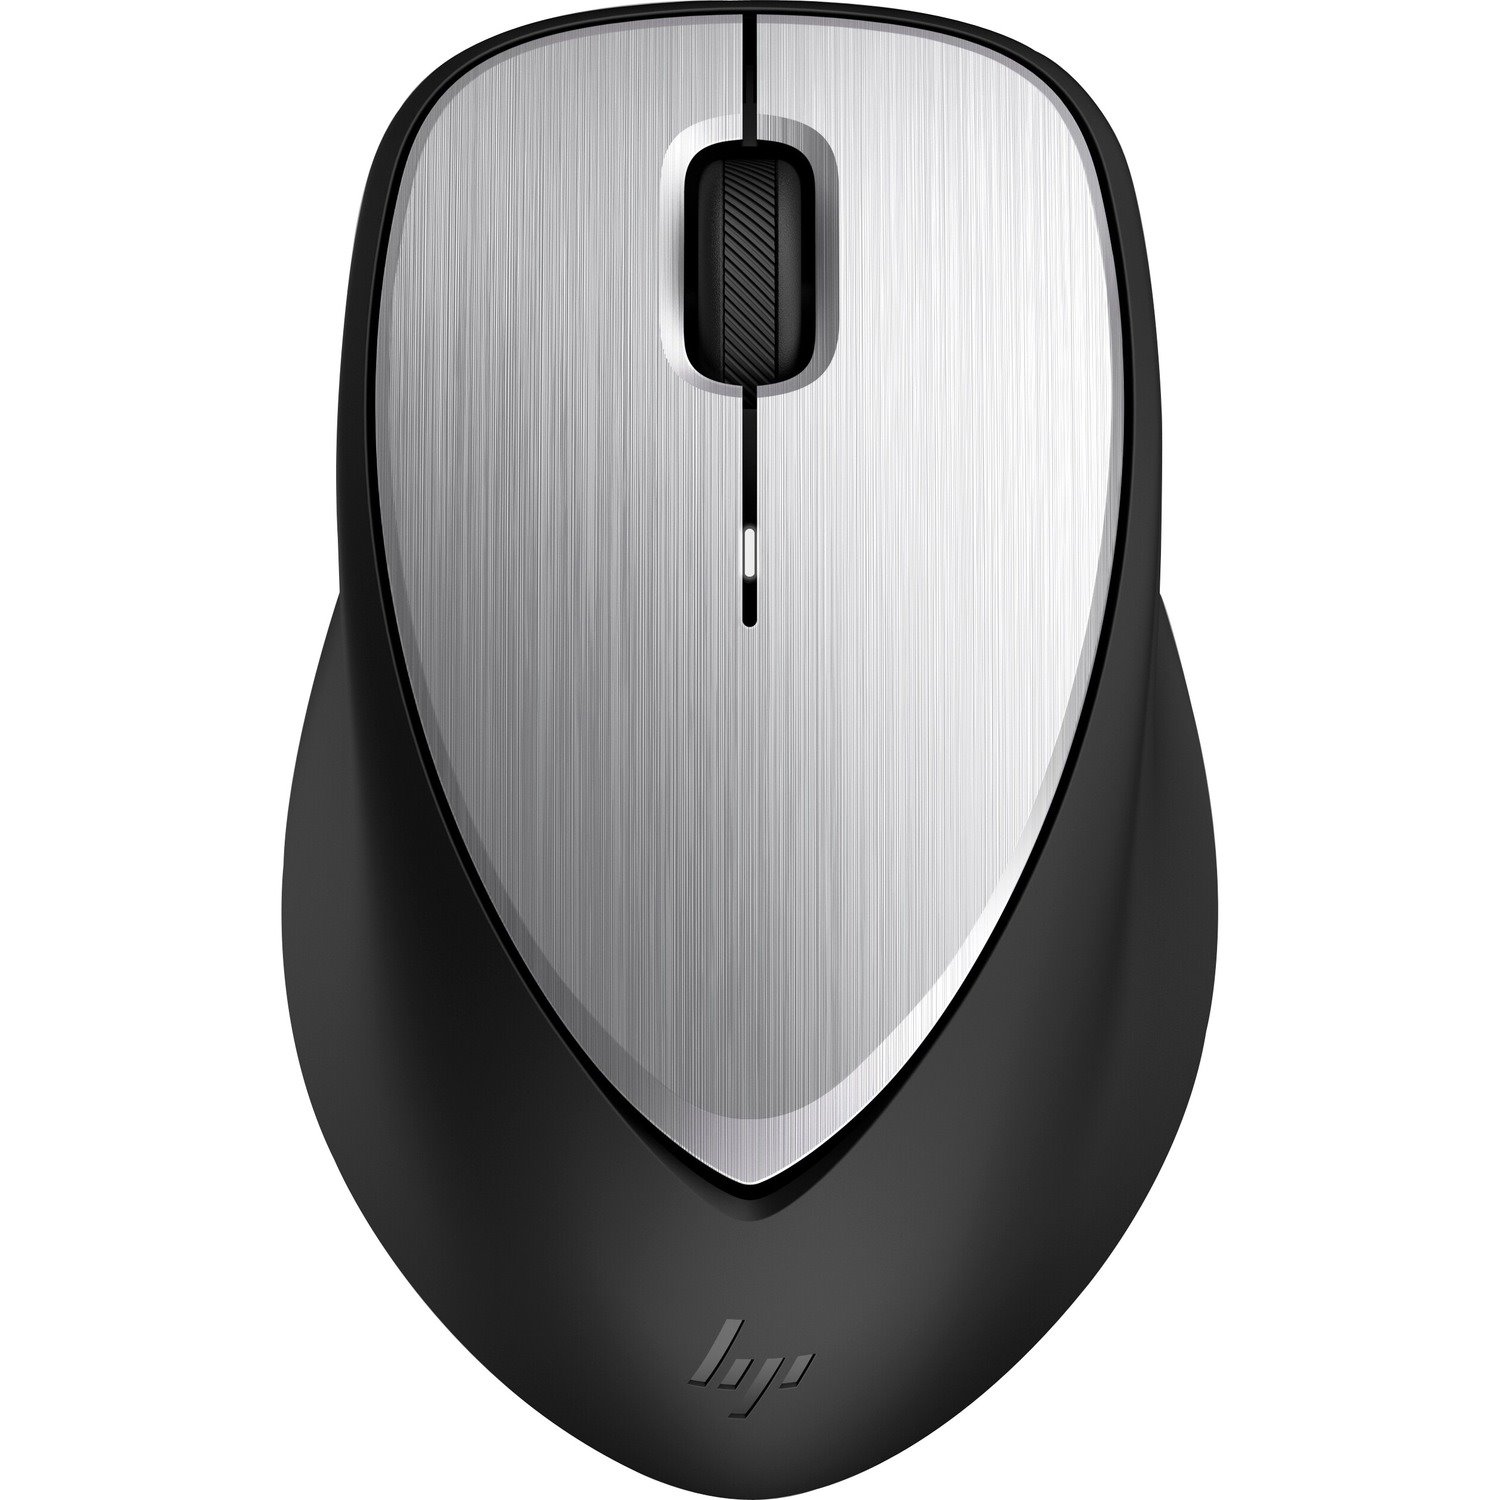 HP ENVY 500 Mouse - Radio Frequency - USB - Laser - 3 Button(s) - Black, Silver